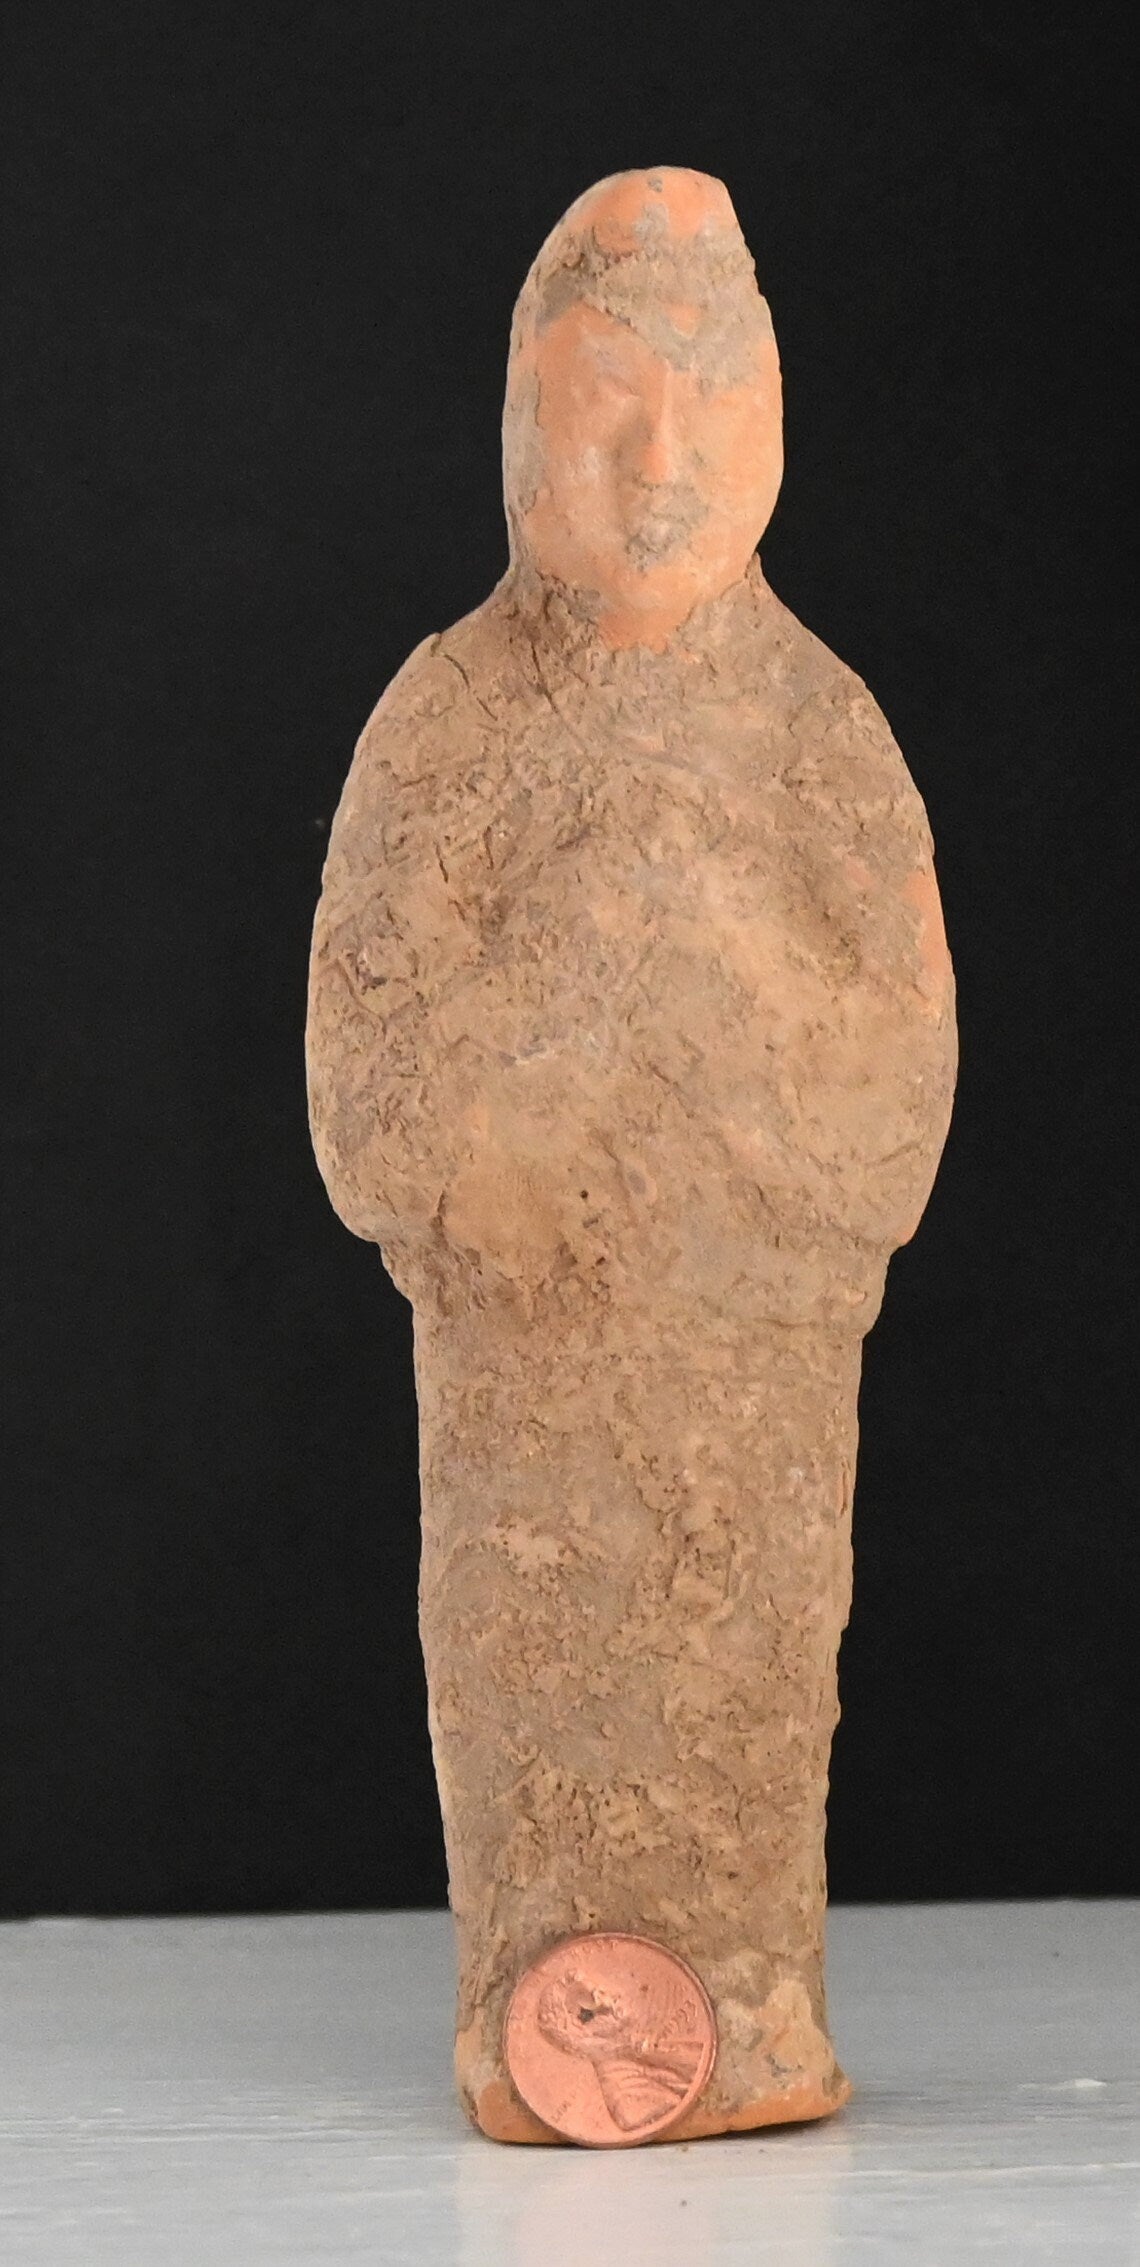 Authentic Han Dynasty, ca. 206 BCE to 220 CE mold-formed terracotta tomb attendant 6 7/8 inches with COA and provenance